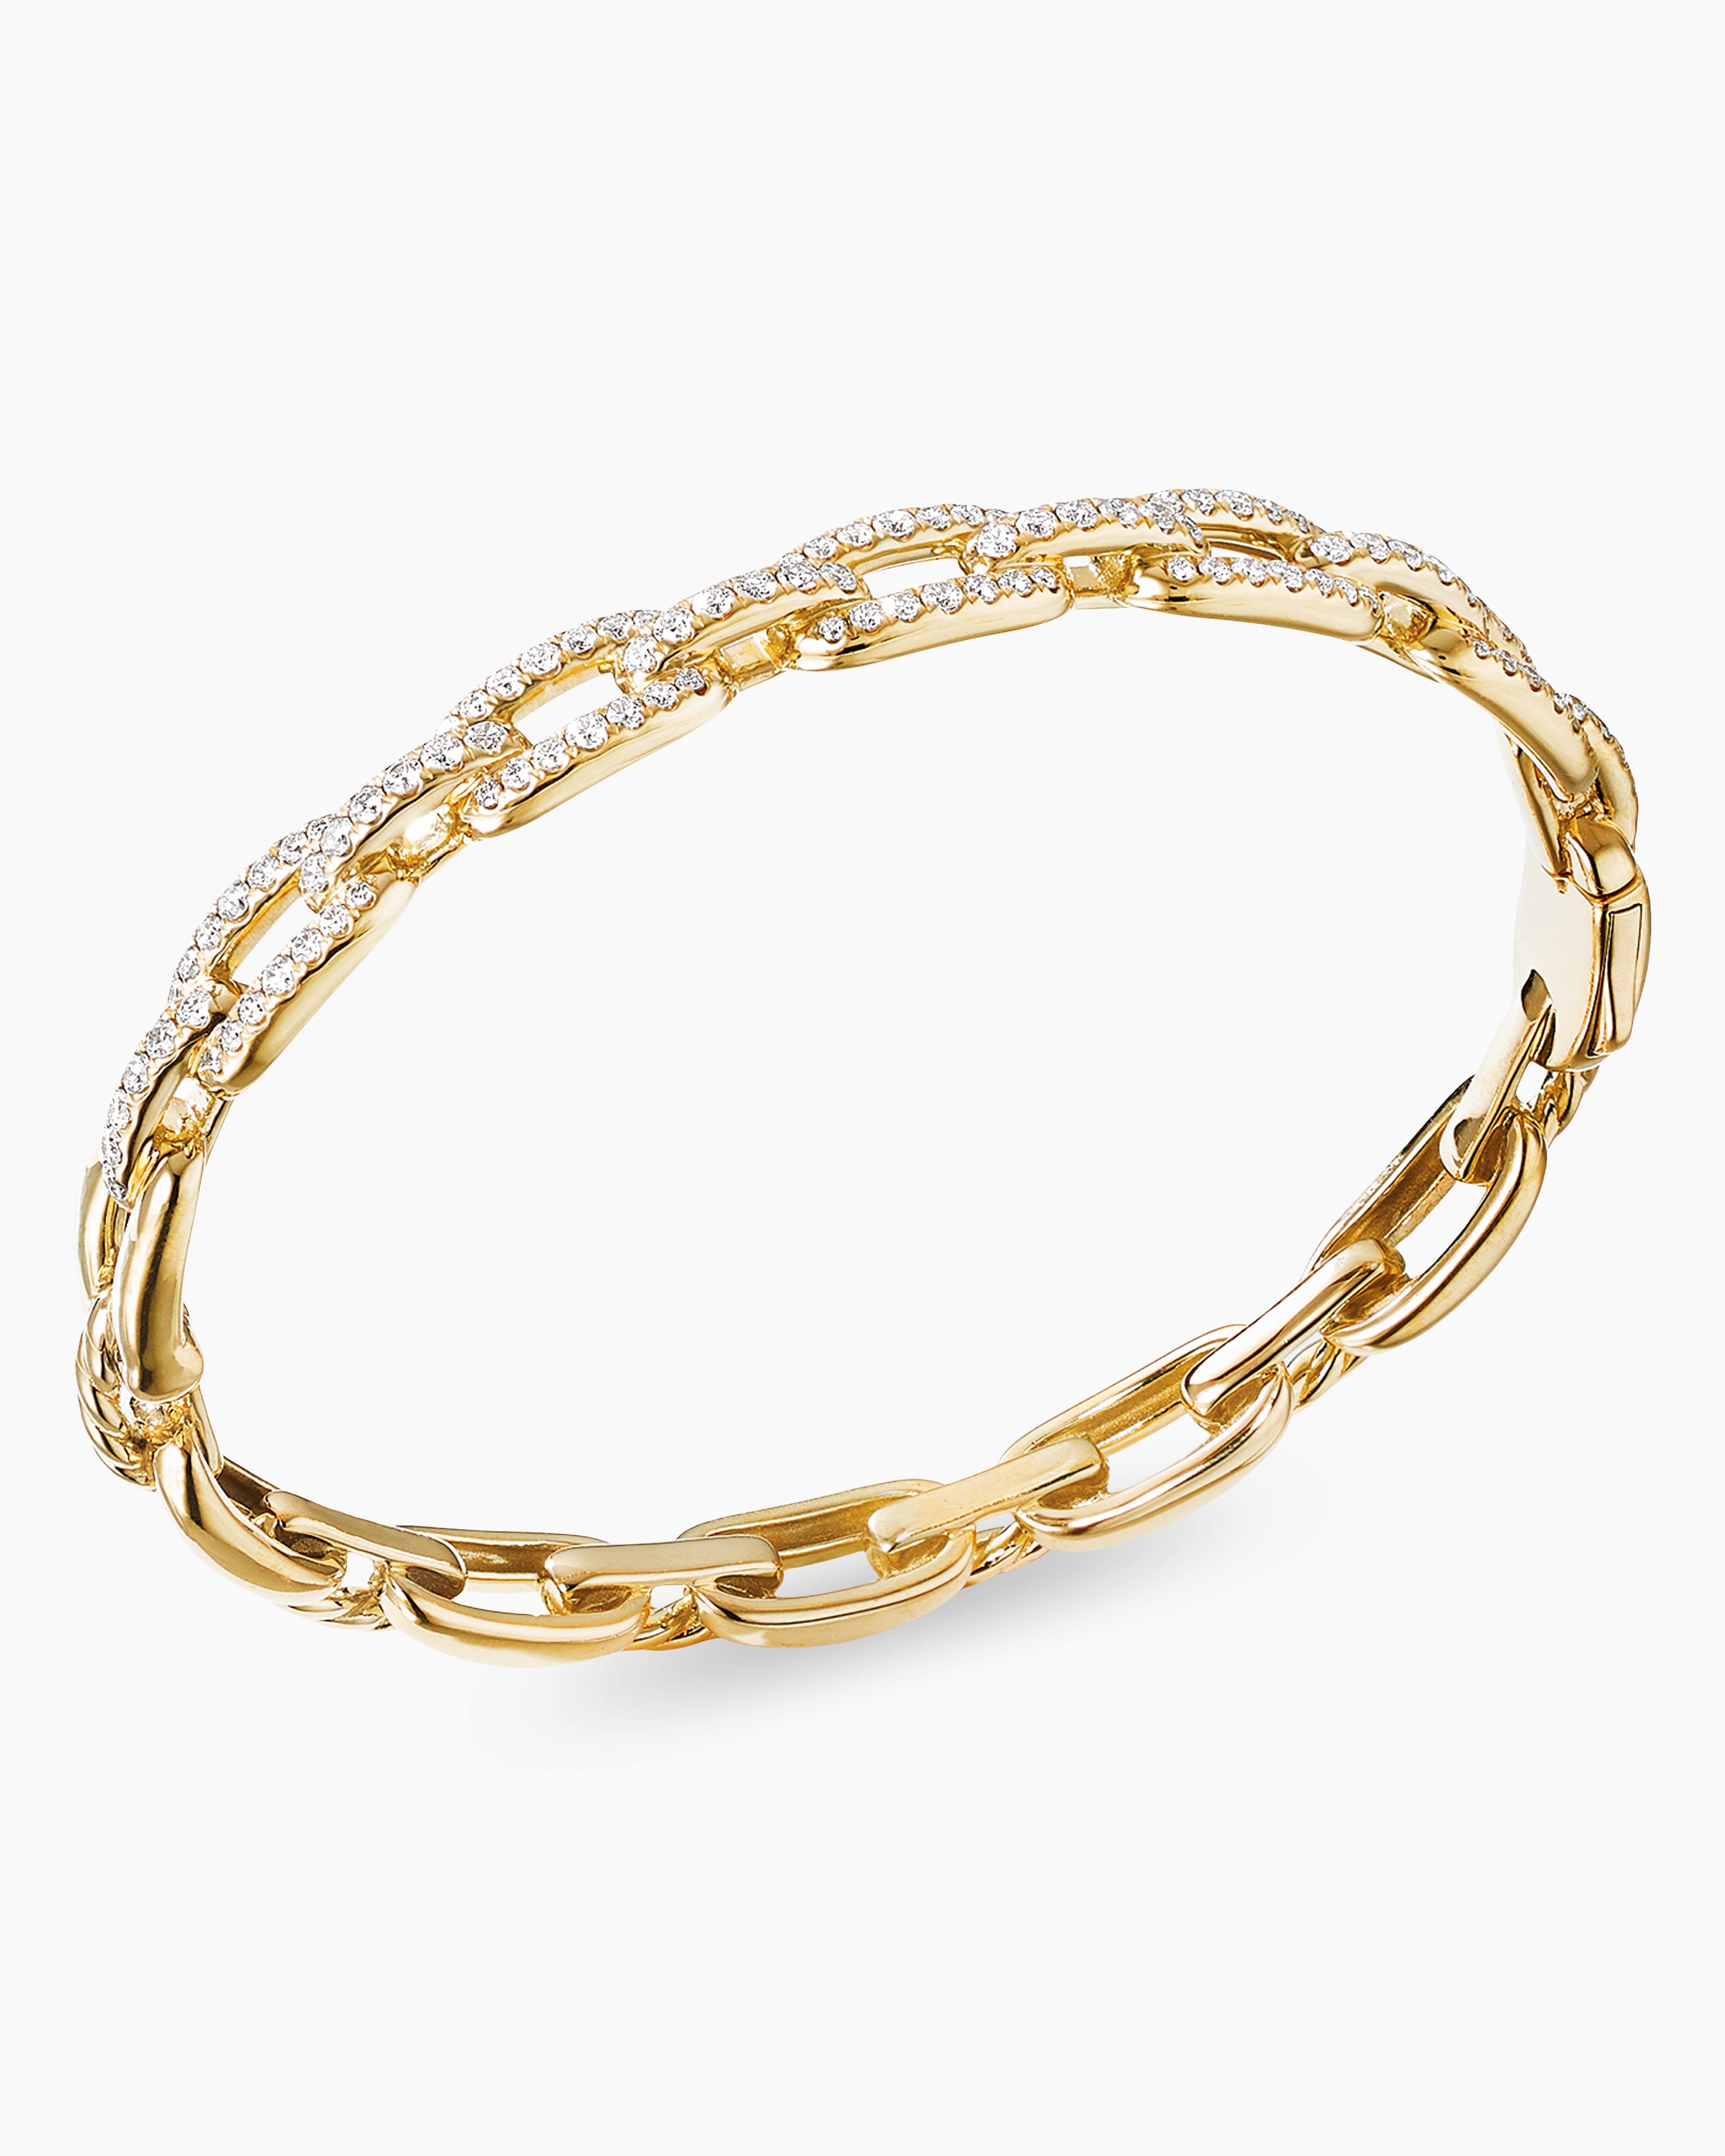 Stax Chain Link Bracelet in 18K Yellow Gold with Diamonds, 7mm